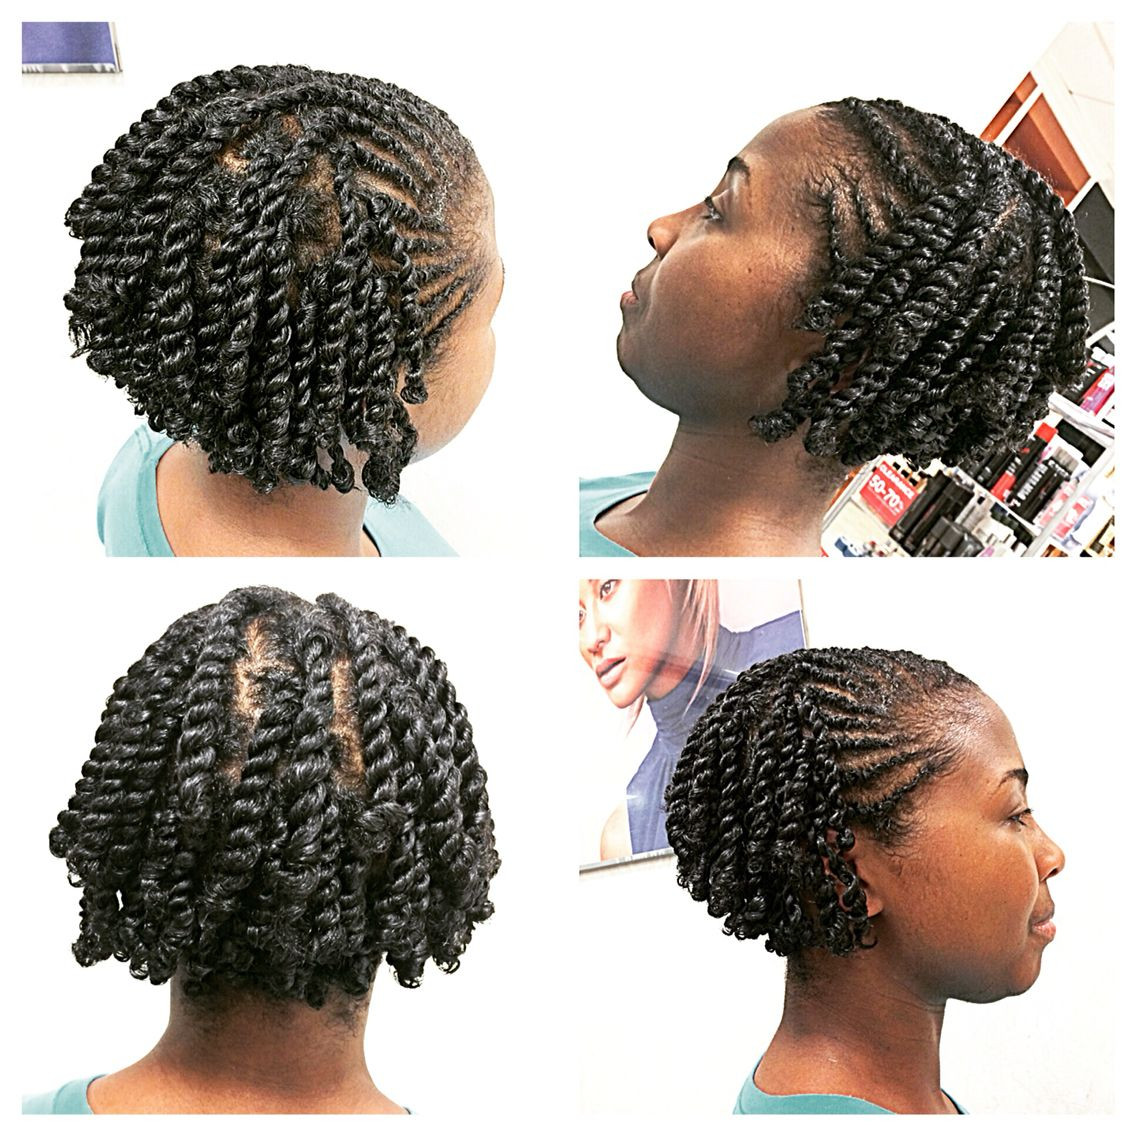 Low Maintenance Natural Hairstyles
 Low maintenance summer workout style for naturally curly